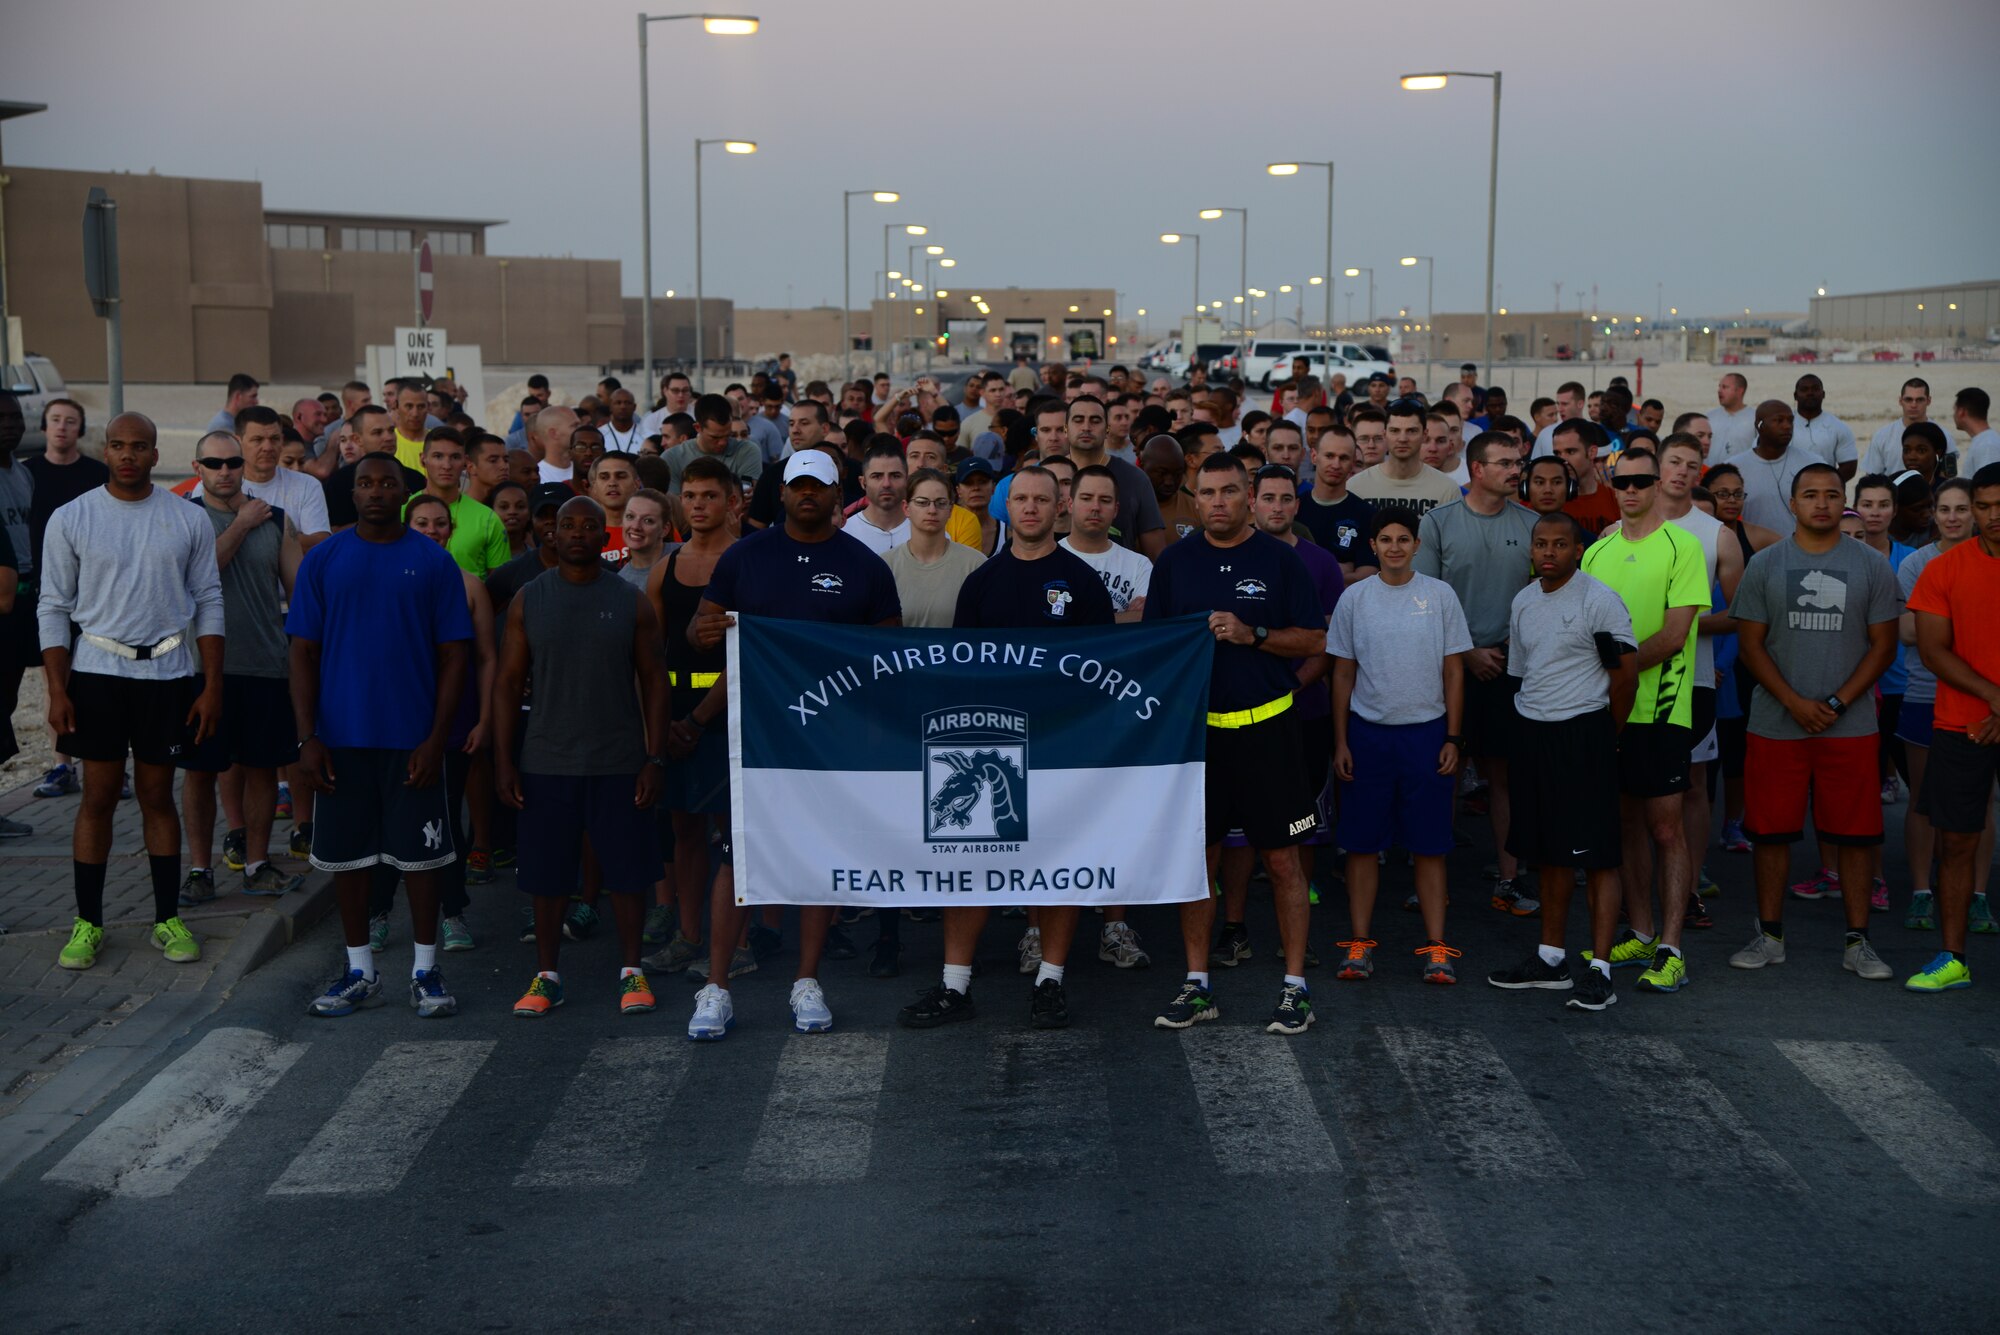 Grand Slam servicemembers, deployed to Al Udeid Air Base, Qatar, did a warrior run, October 25, in honor of two fallen comrades, who died while supporting Operation Enduring Freedom.  The servicemembers honored are Major Michael Donahue and Sergeant First Class Matthew Leggett, who were assigned to the 18th Airborne Corps at Fort Bragg, S.C. (U.S. Air Force photo by Staff Sgt. Ciara Wymbs)